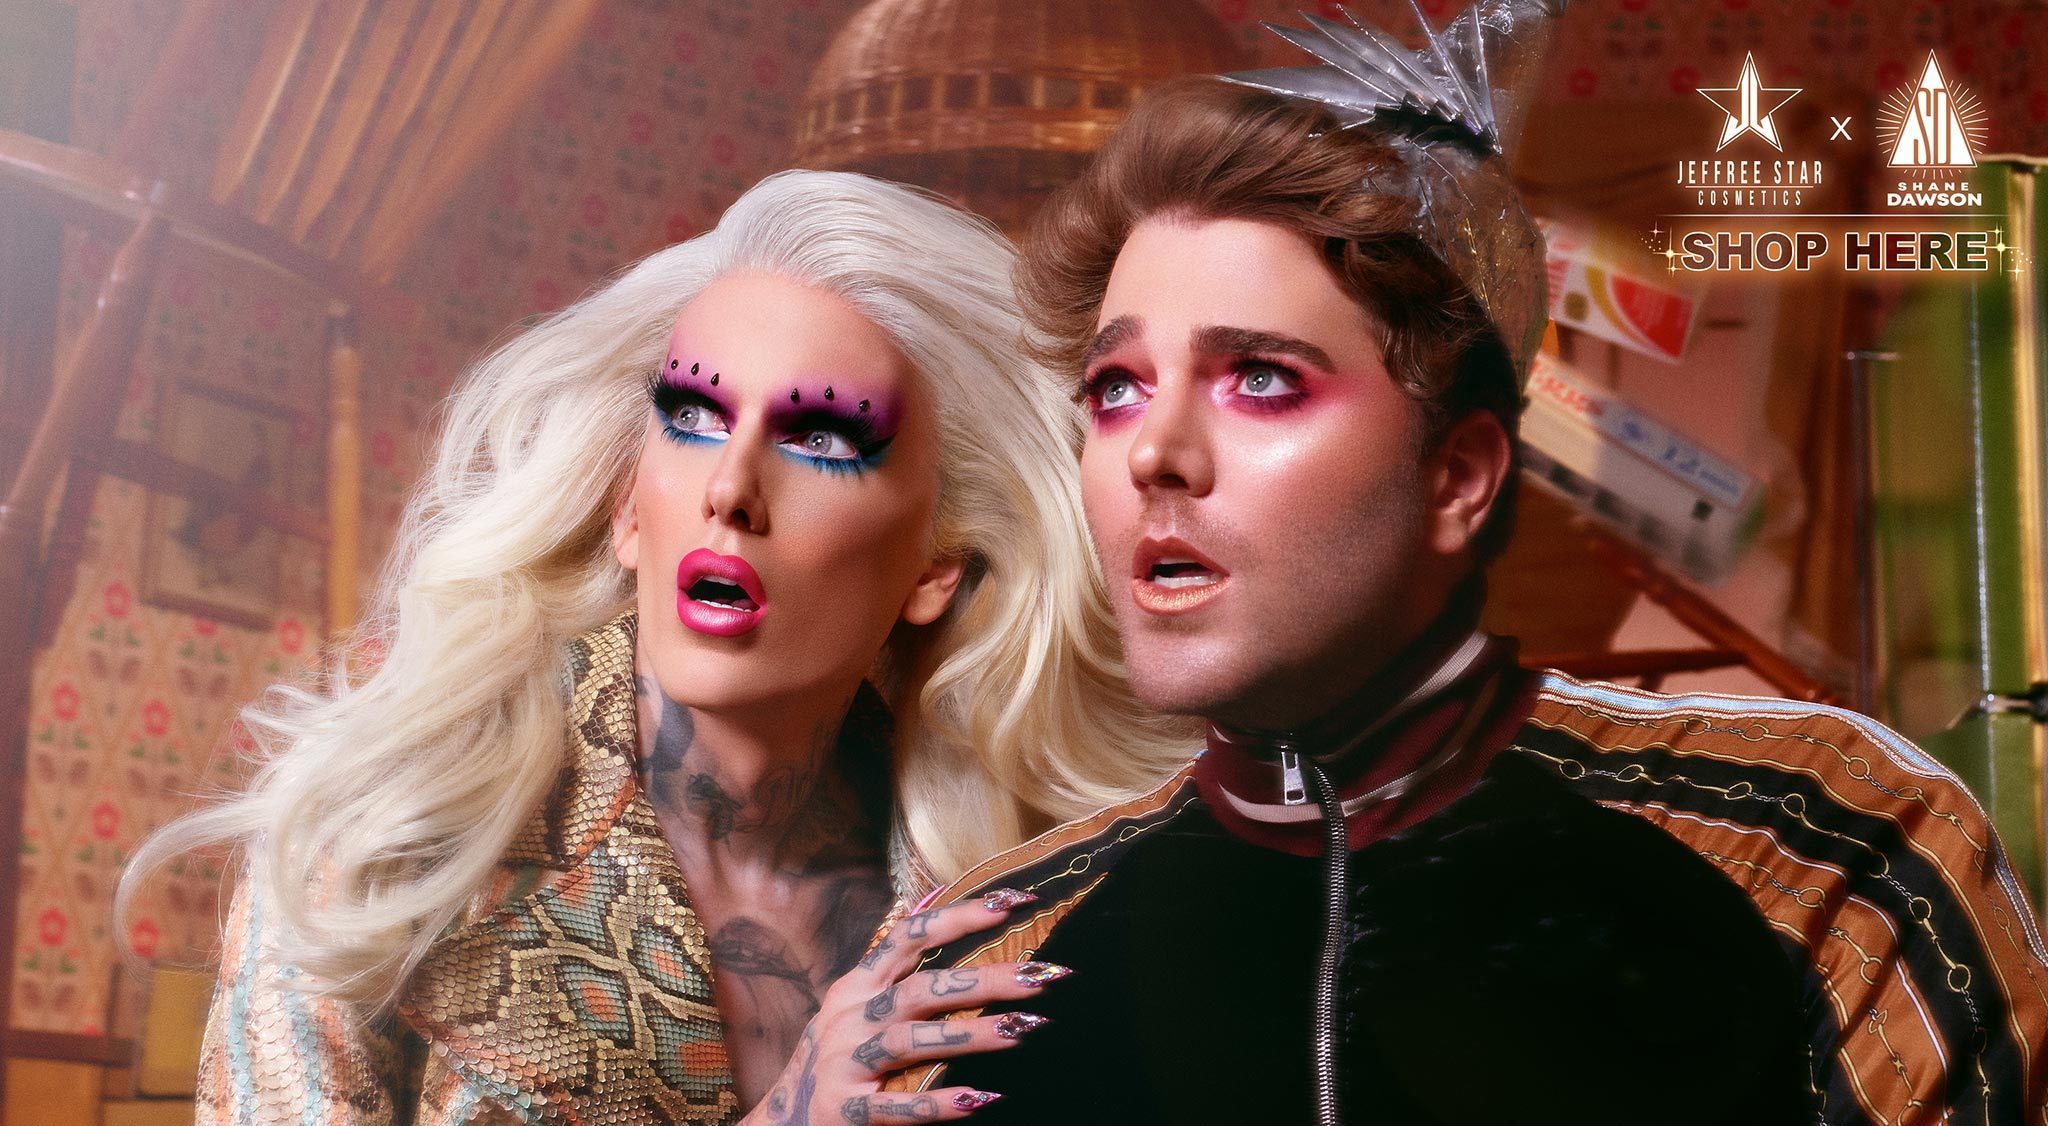 Shane Dawson and Jeffree Star create a hit  series and amazing  makeup products - The Western Howl